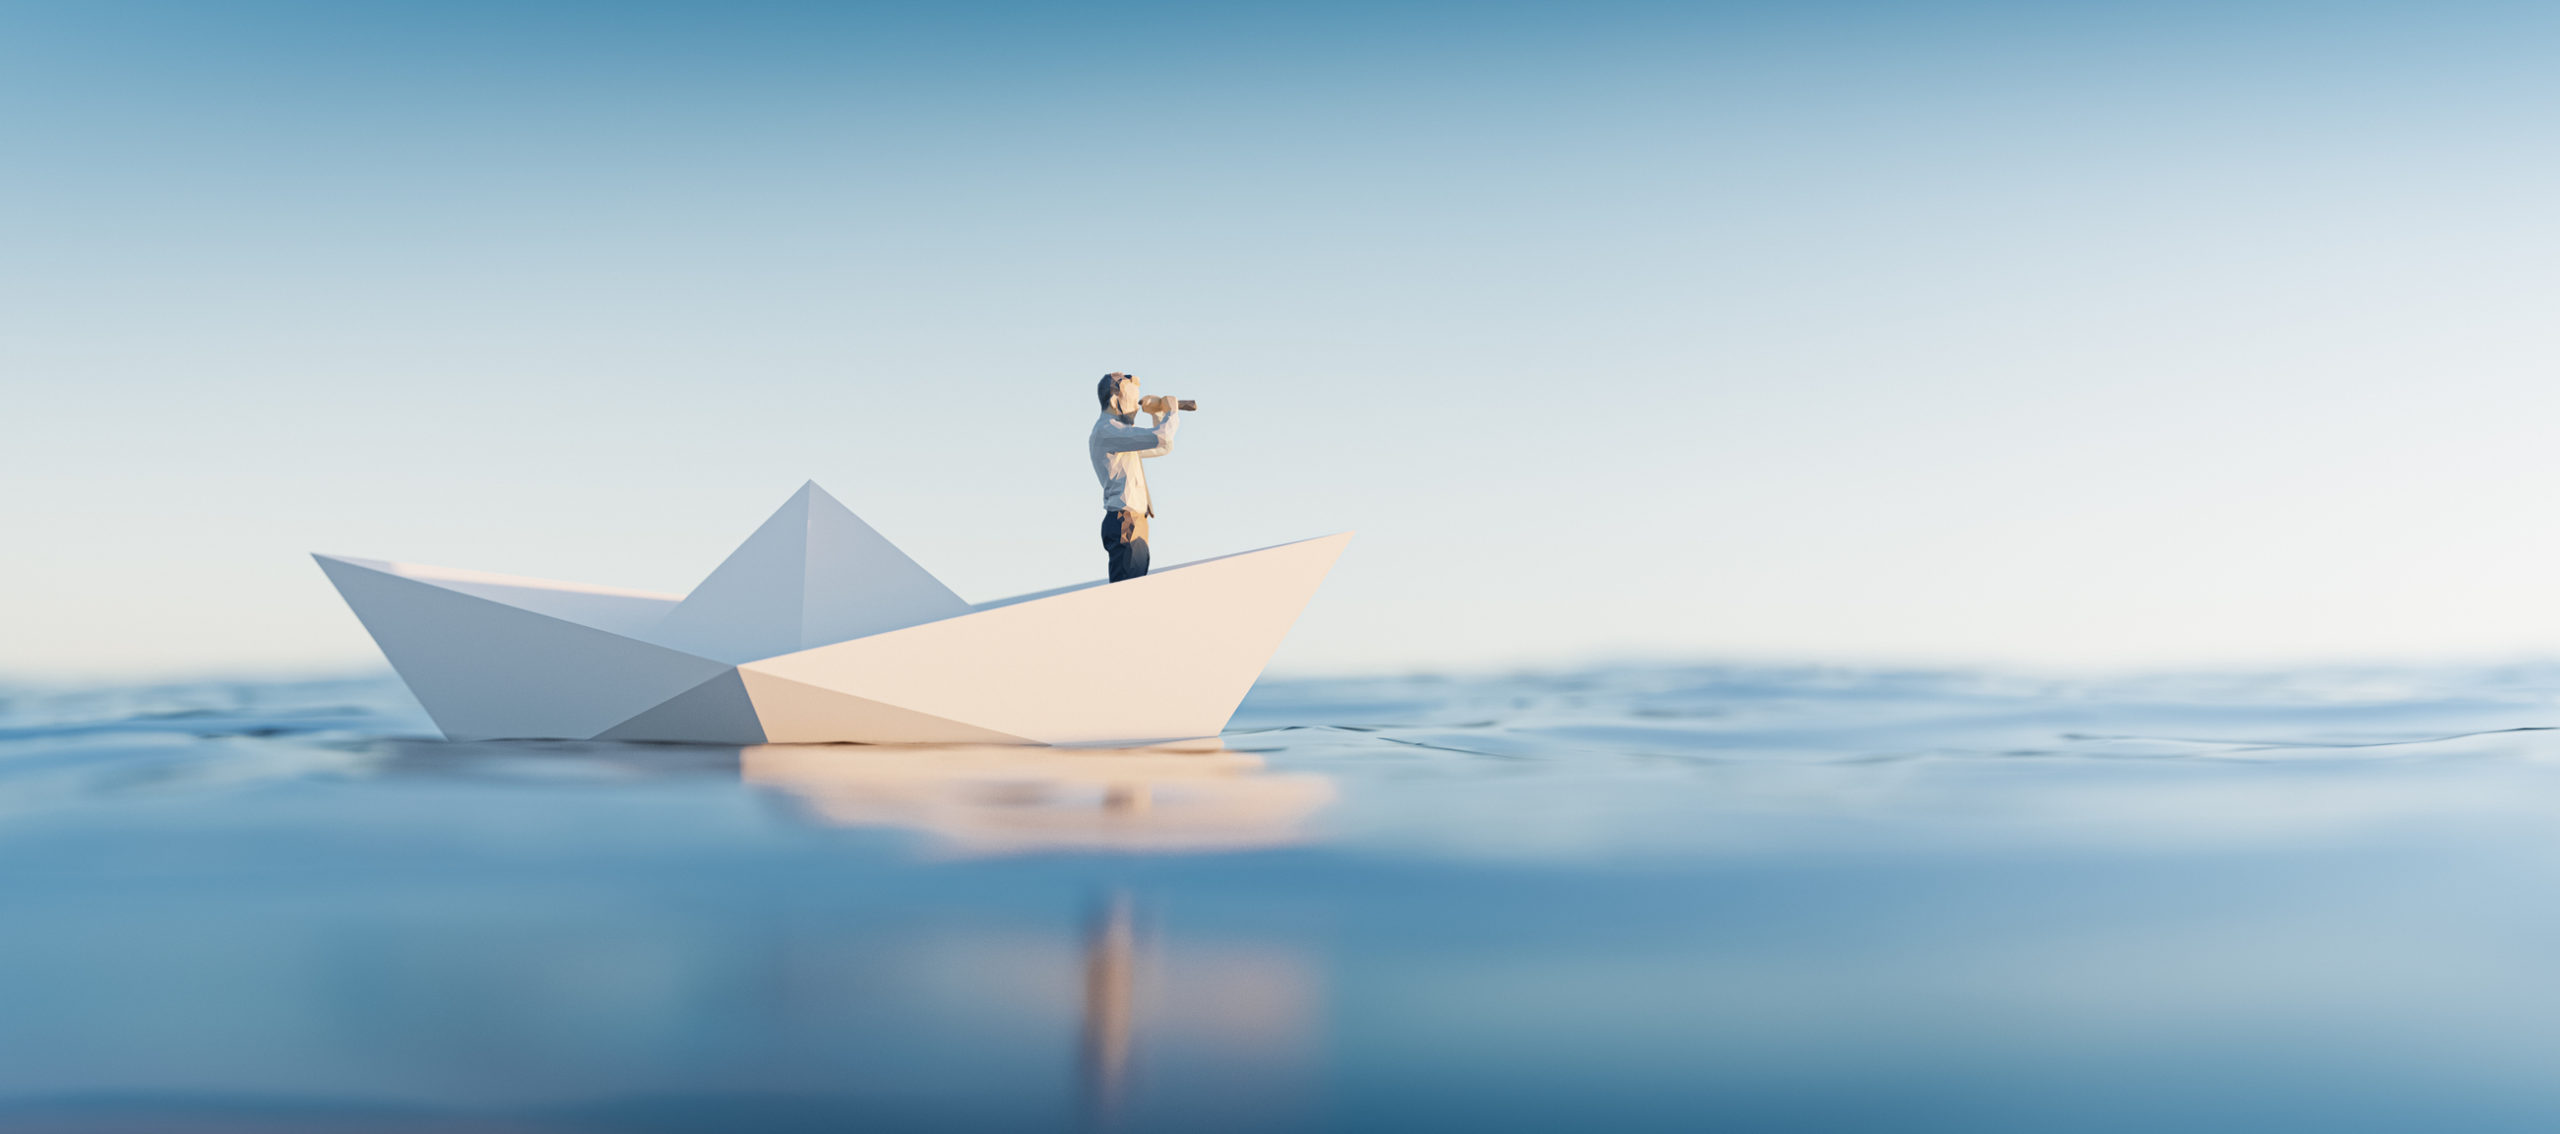 Man floating on a paper boat looking towards the horizon